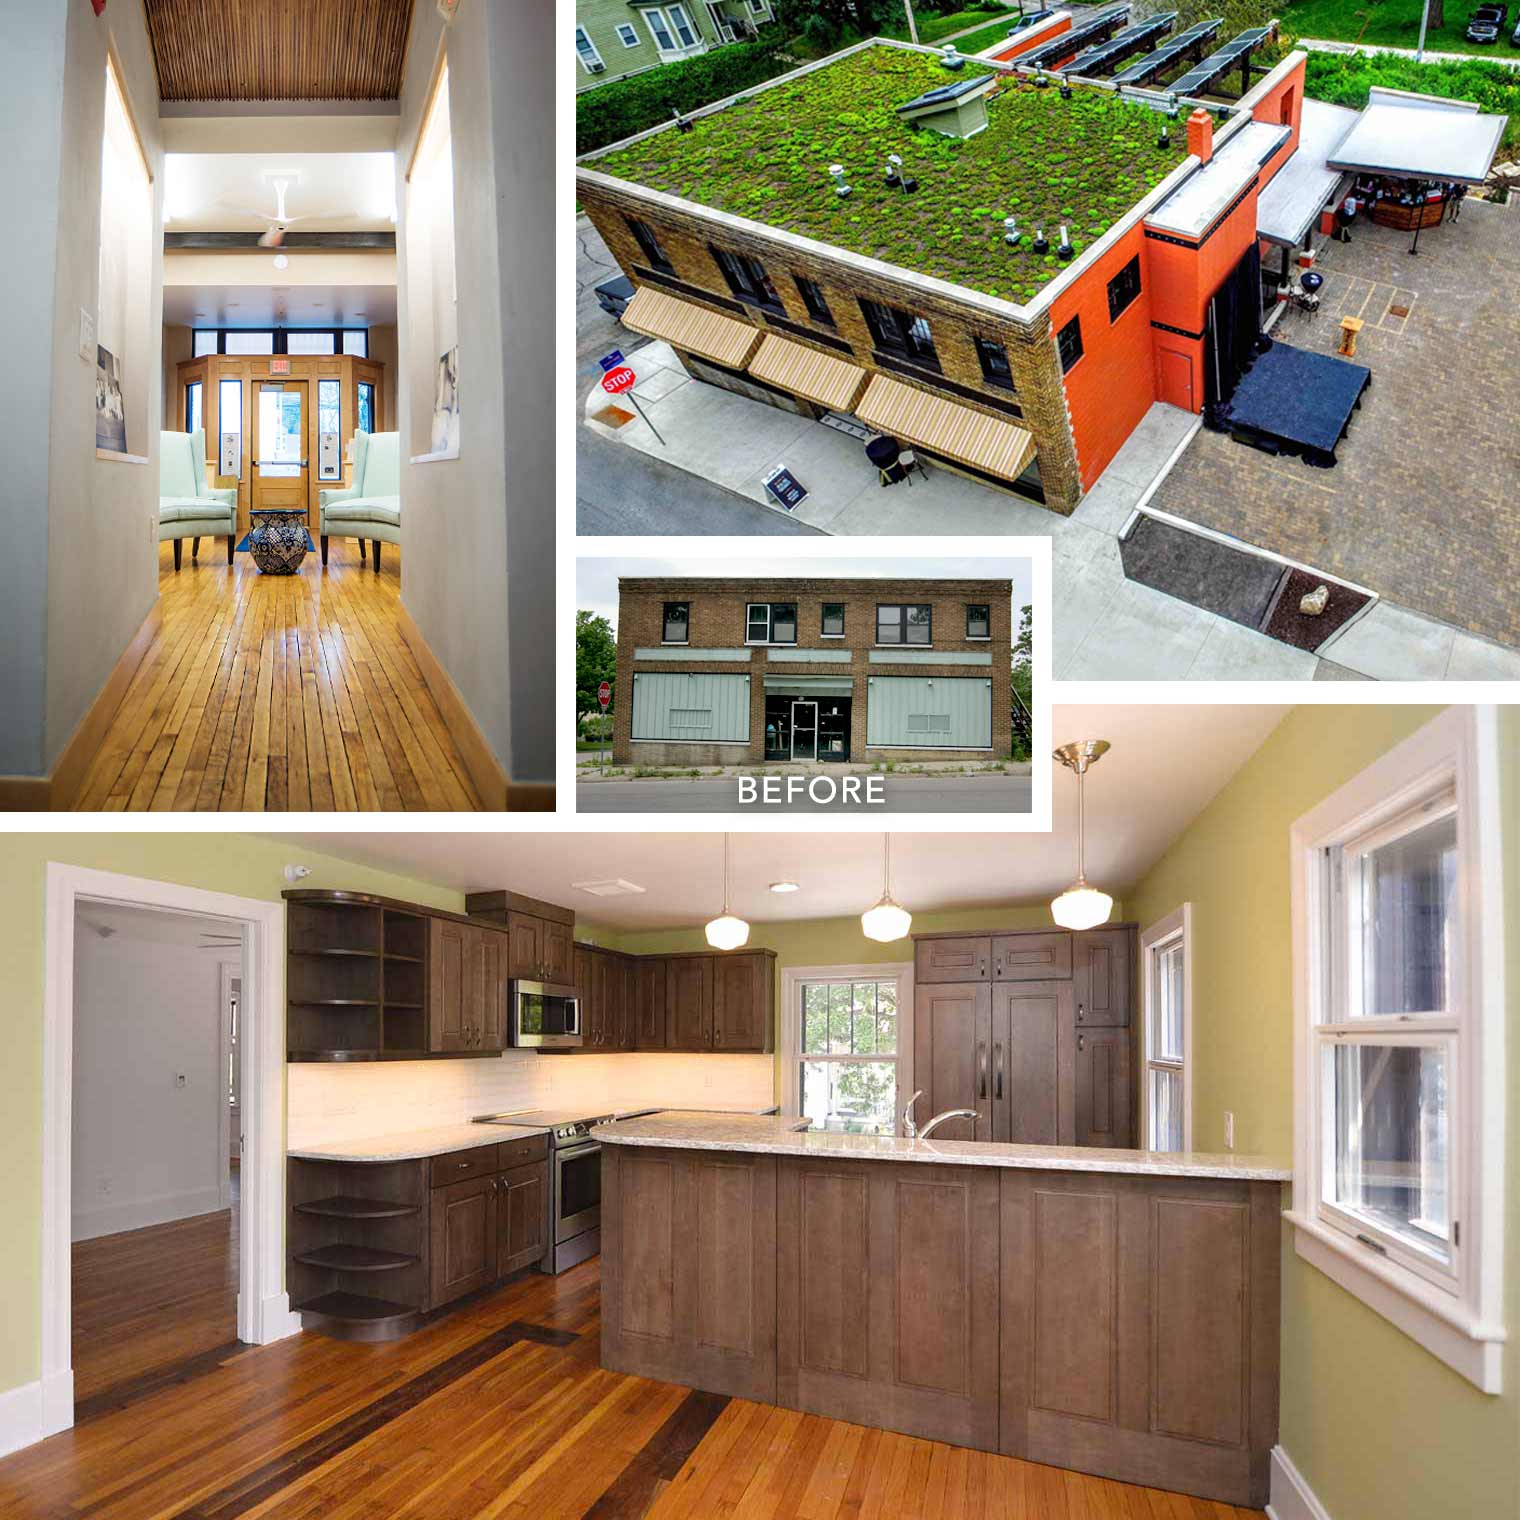 Silent Rivers projects 2017_Green & Main building sustainable remodel historic renovation with living green roof and salvaged hardwood floors